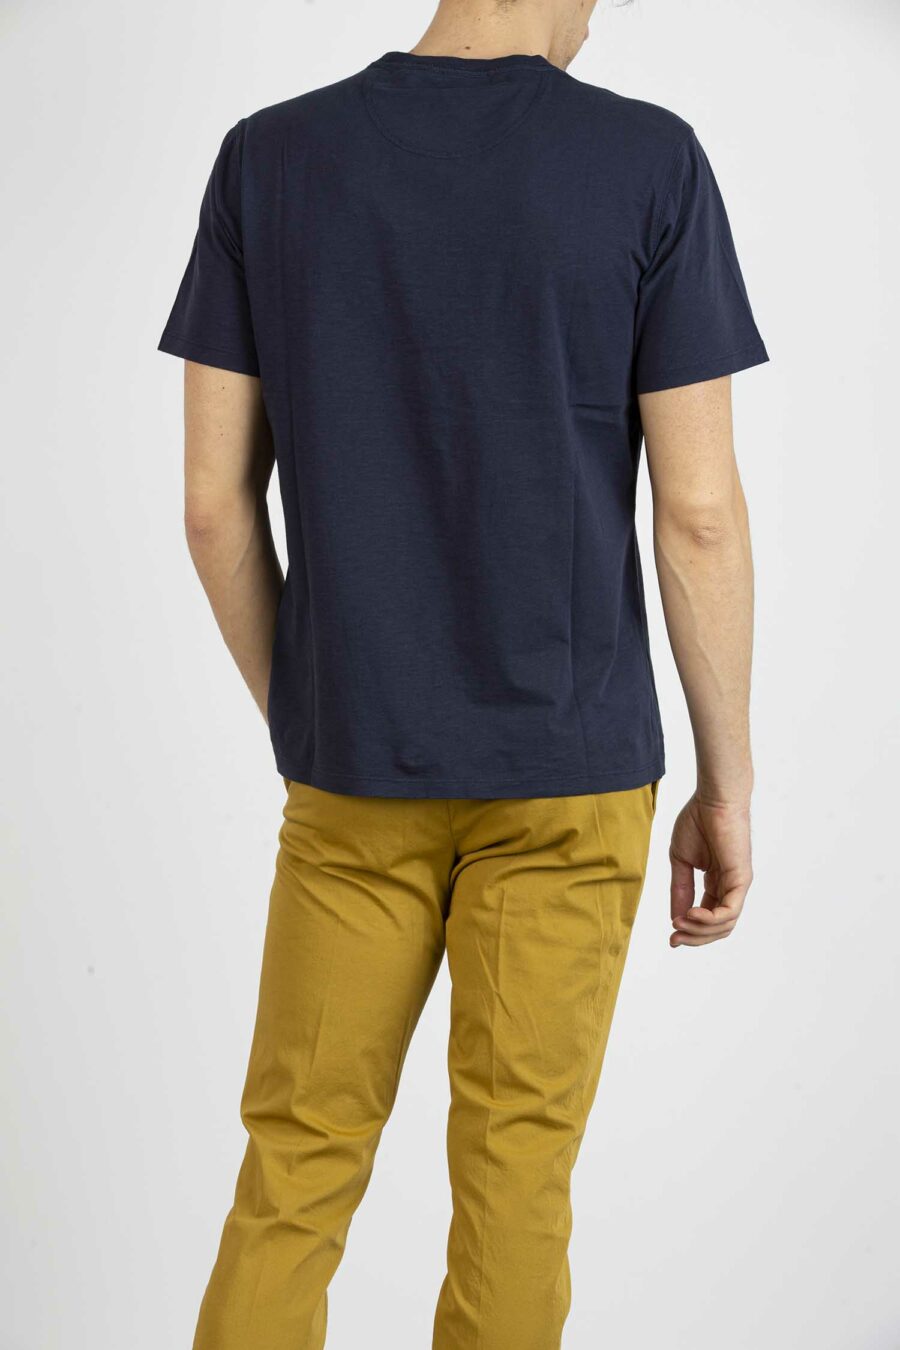 BARBOUR-T.SHIRT STAMPA-BBMTS0934 BLU